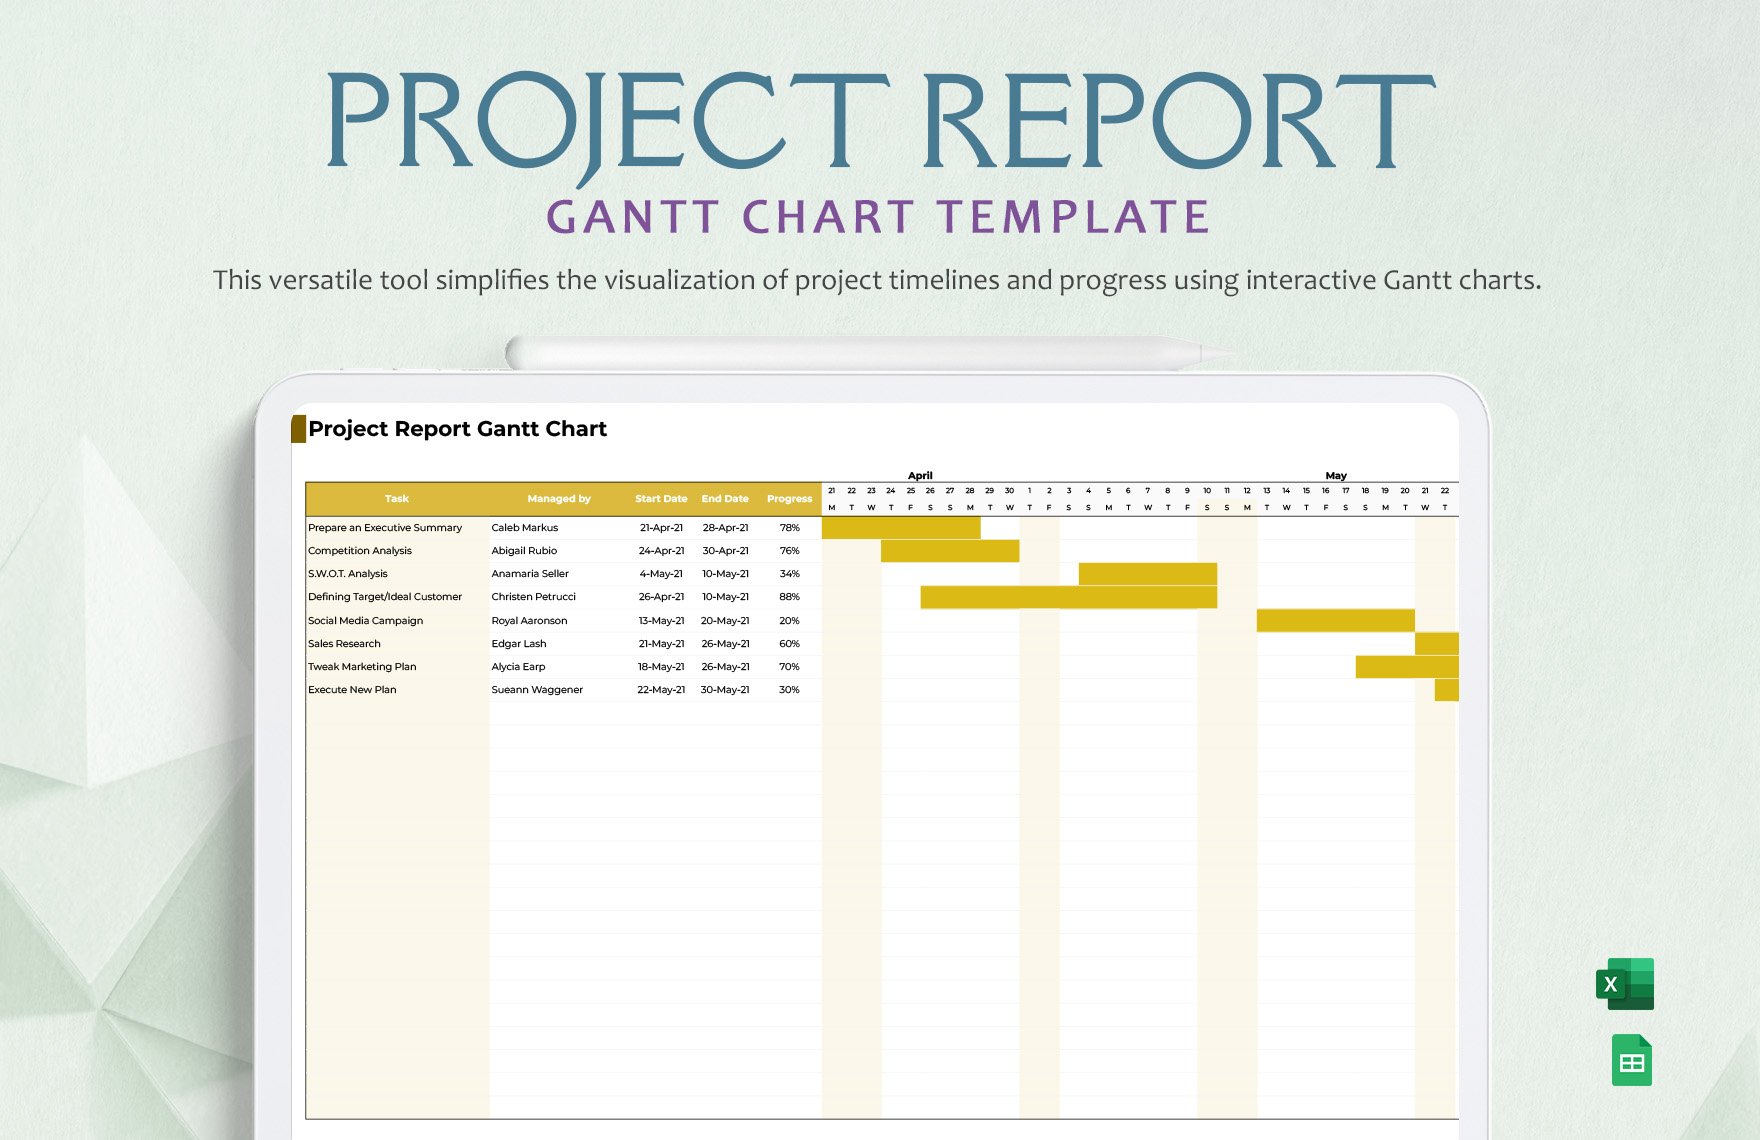 Project Report Gantt Chart Template in Excel, Google Sheets